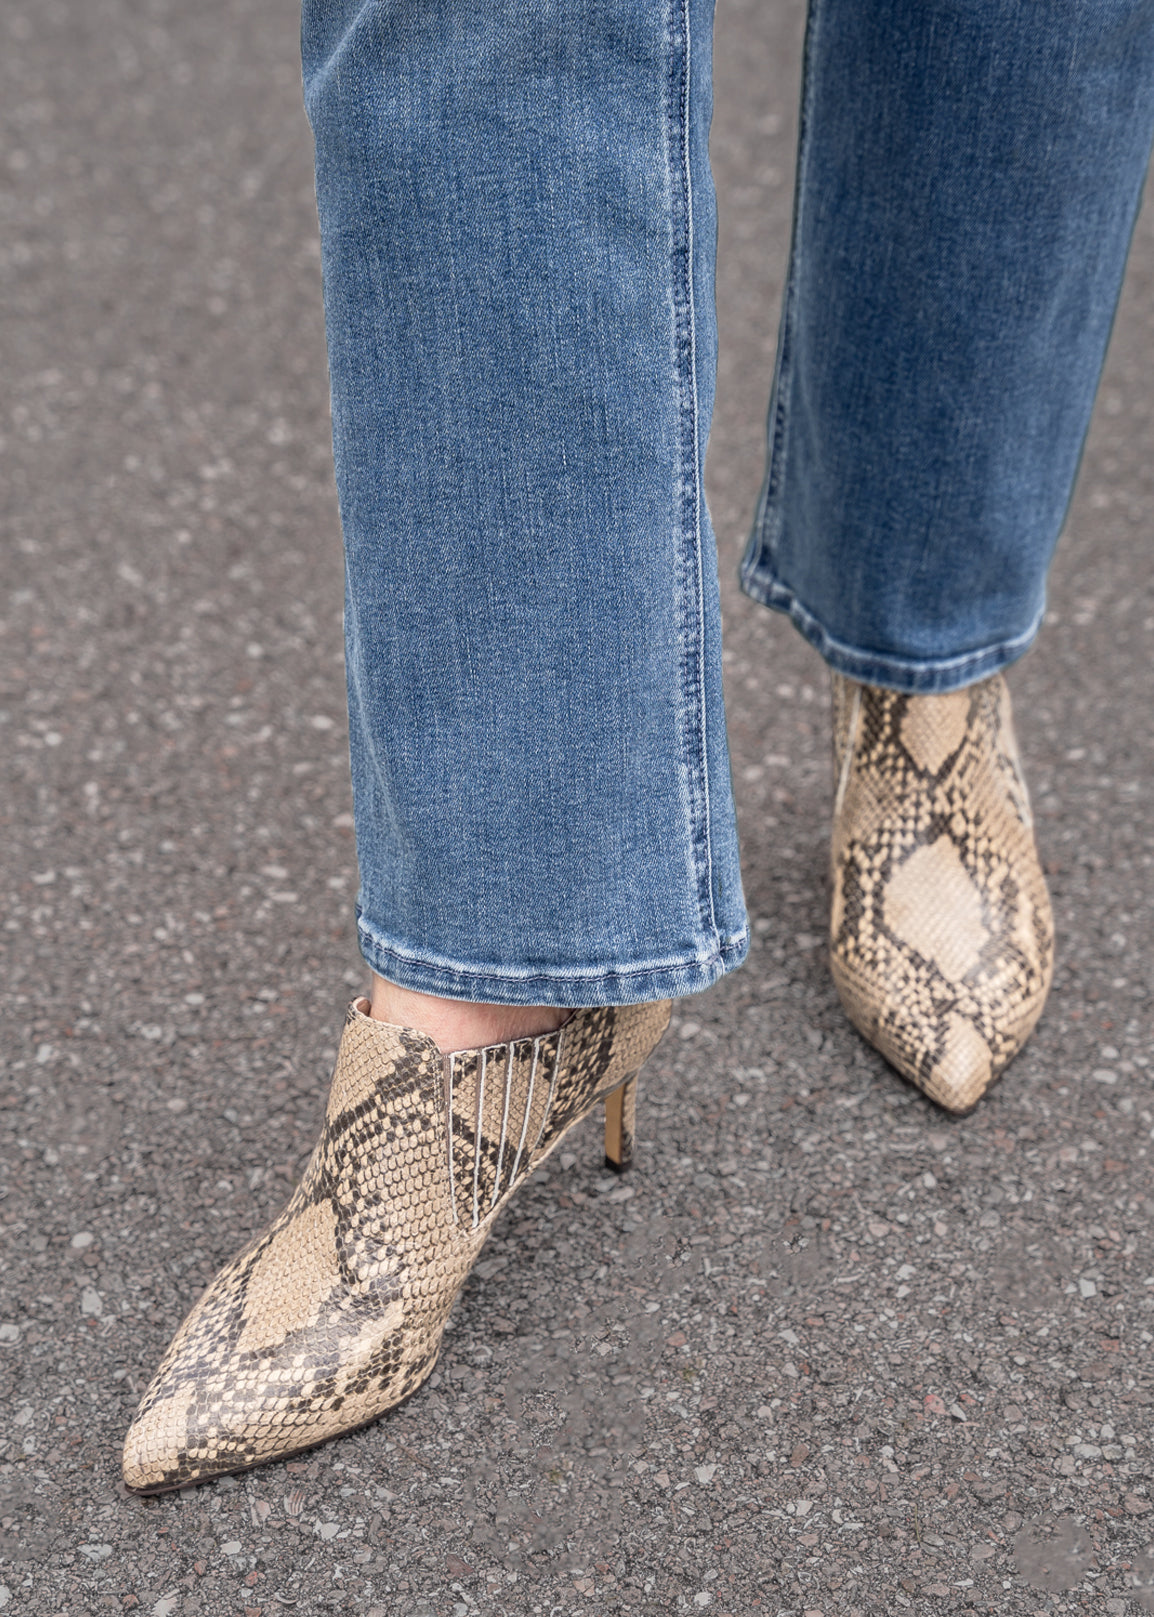 Who knew a skinny heel could be so comfortable? If you haven’t tried a pair of Inez shoes I don’t know what the heck you’re waiting for. Comfort like you wouldn’t believe.